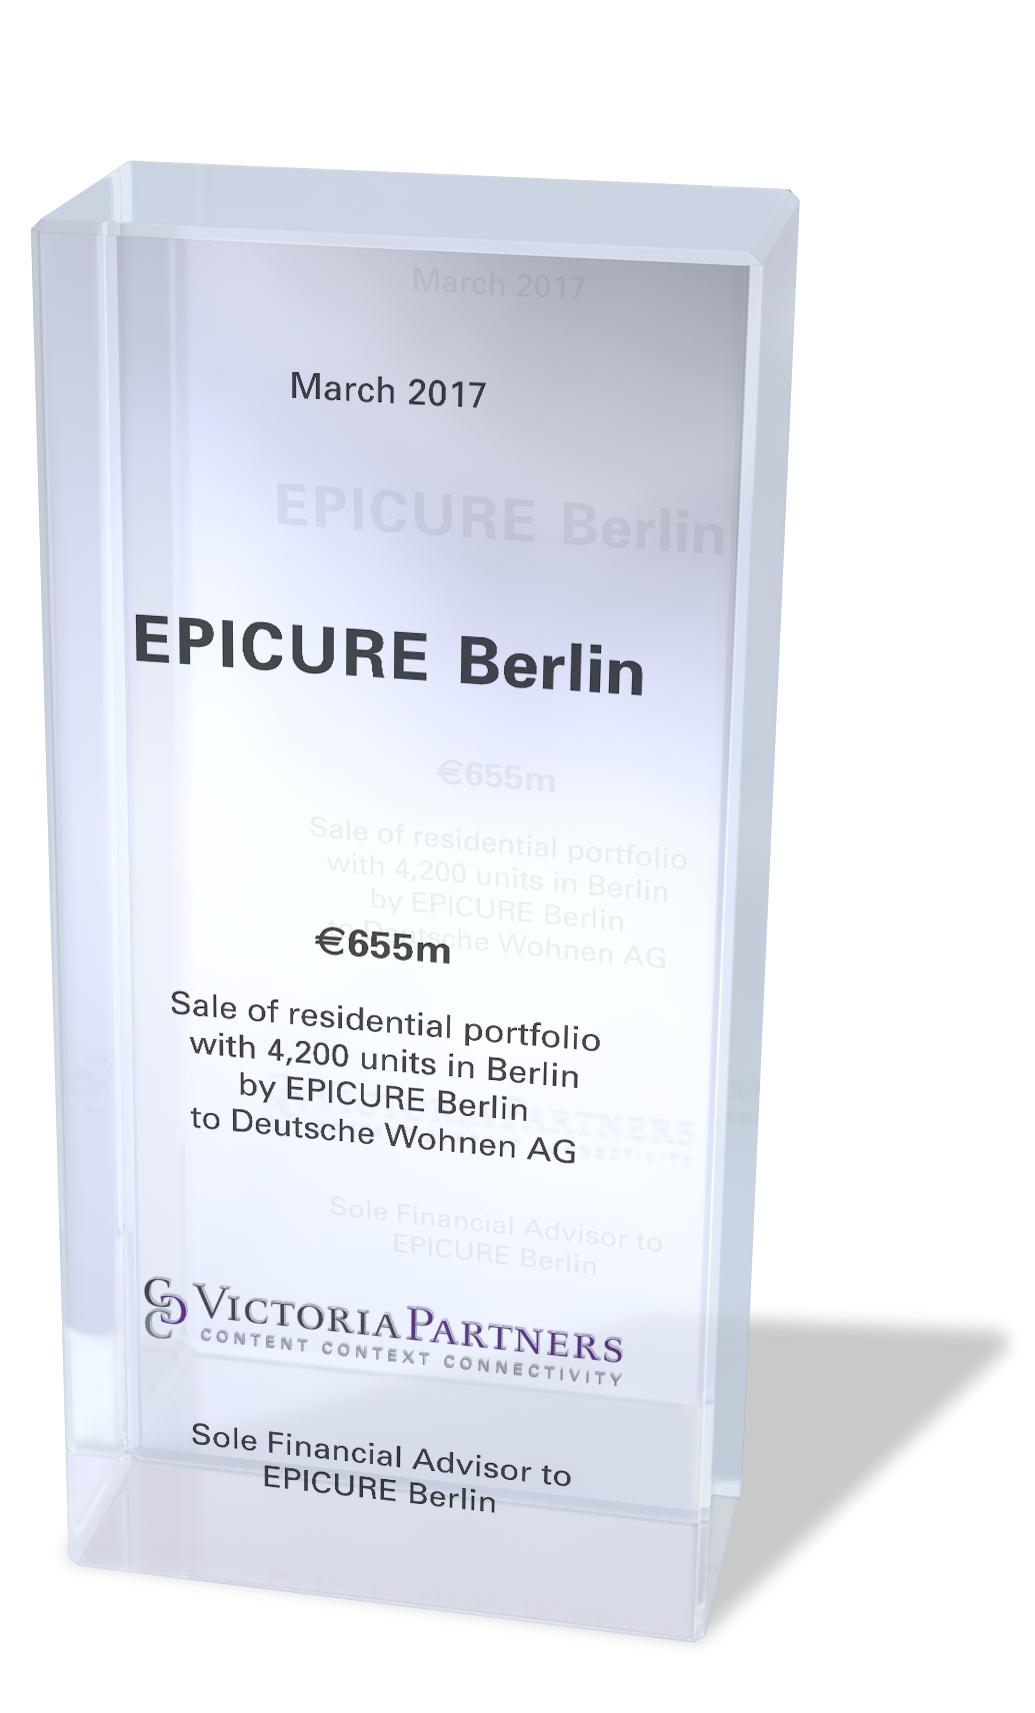 VICTORIAPARTNERS - Sole Financial Advisor to Epicure Berlin - March 2017